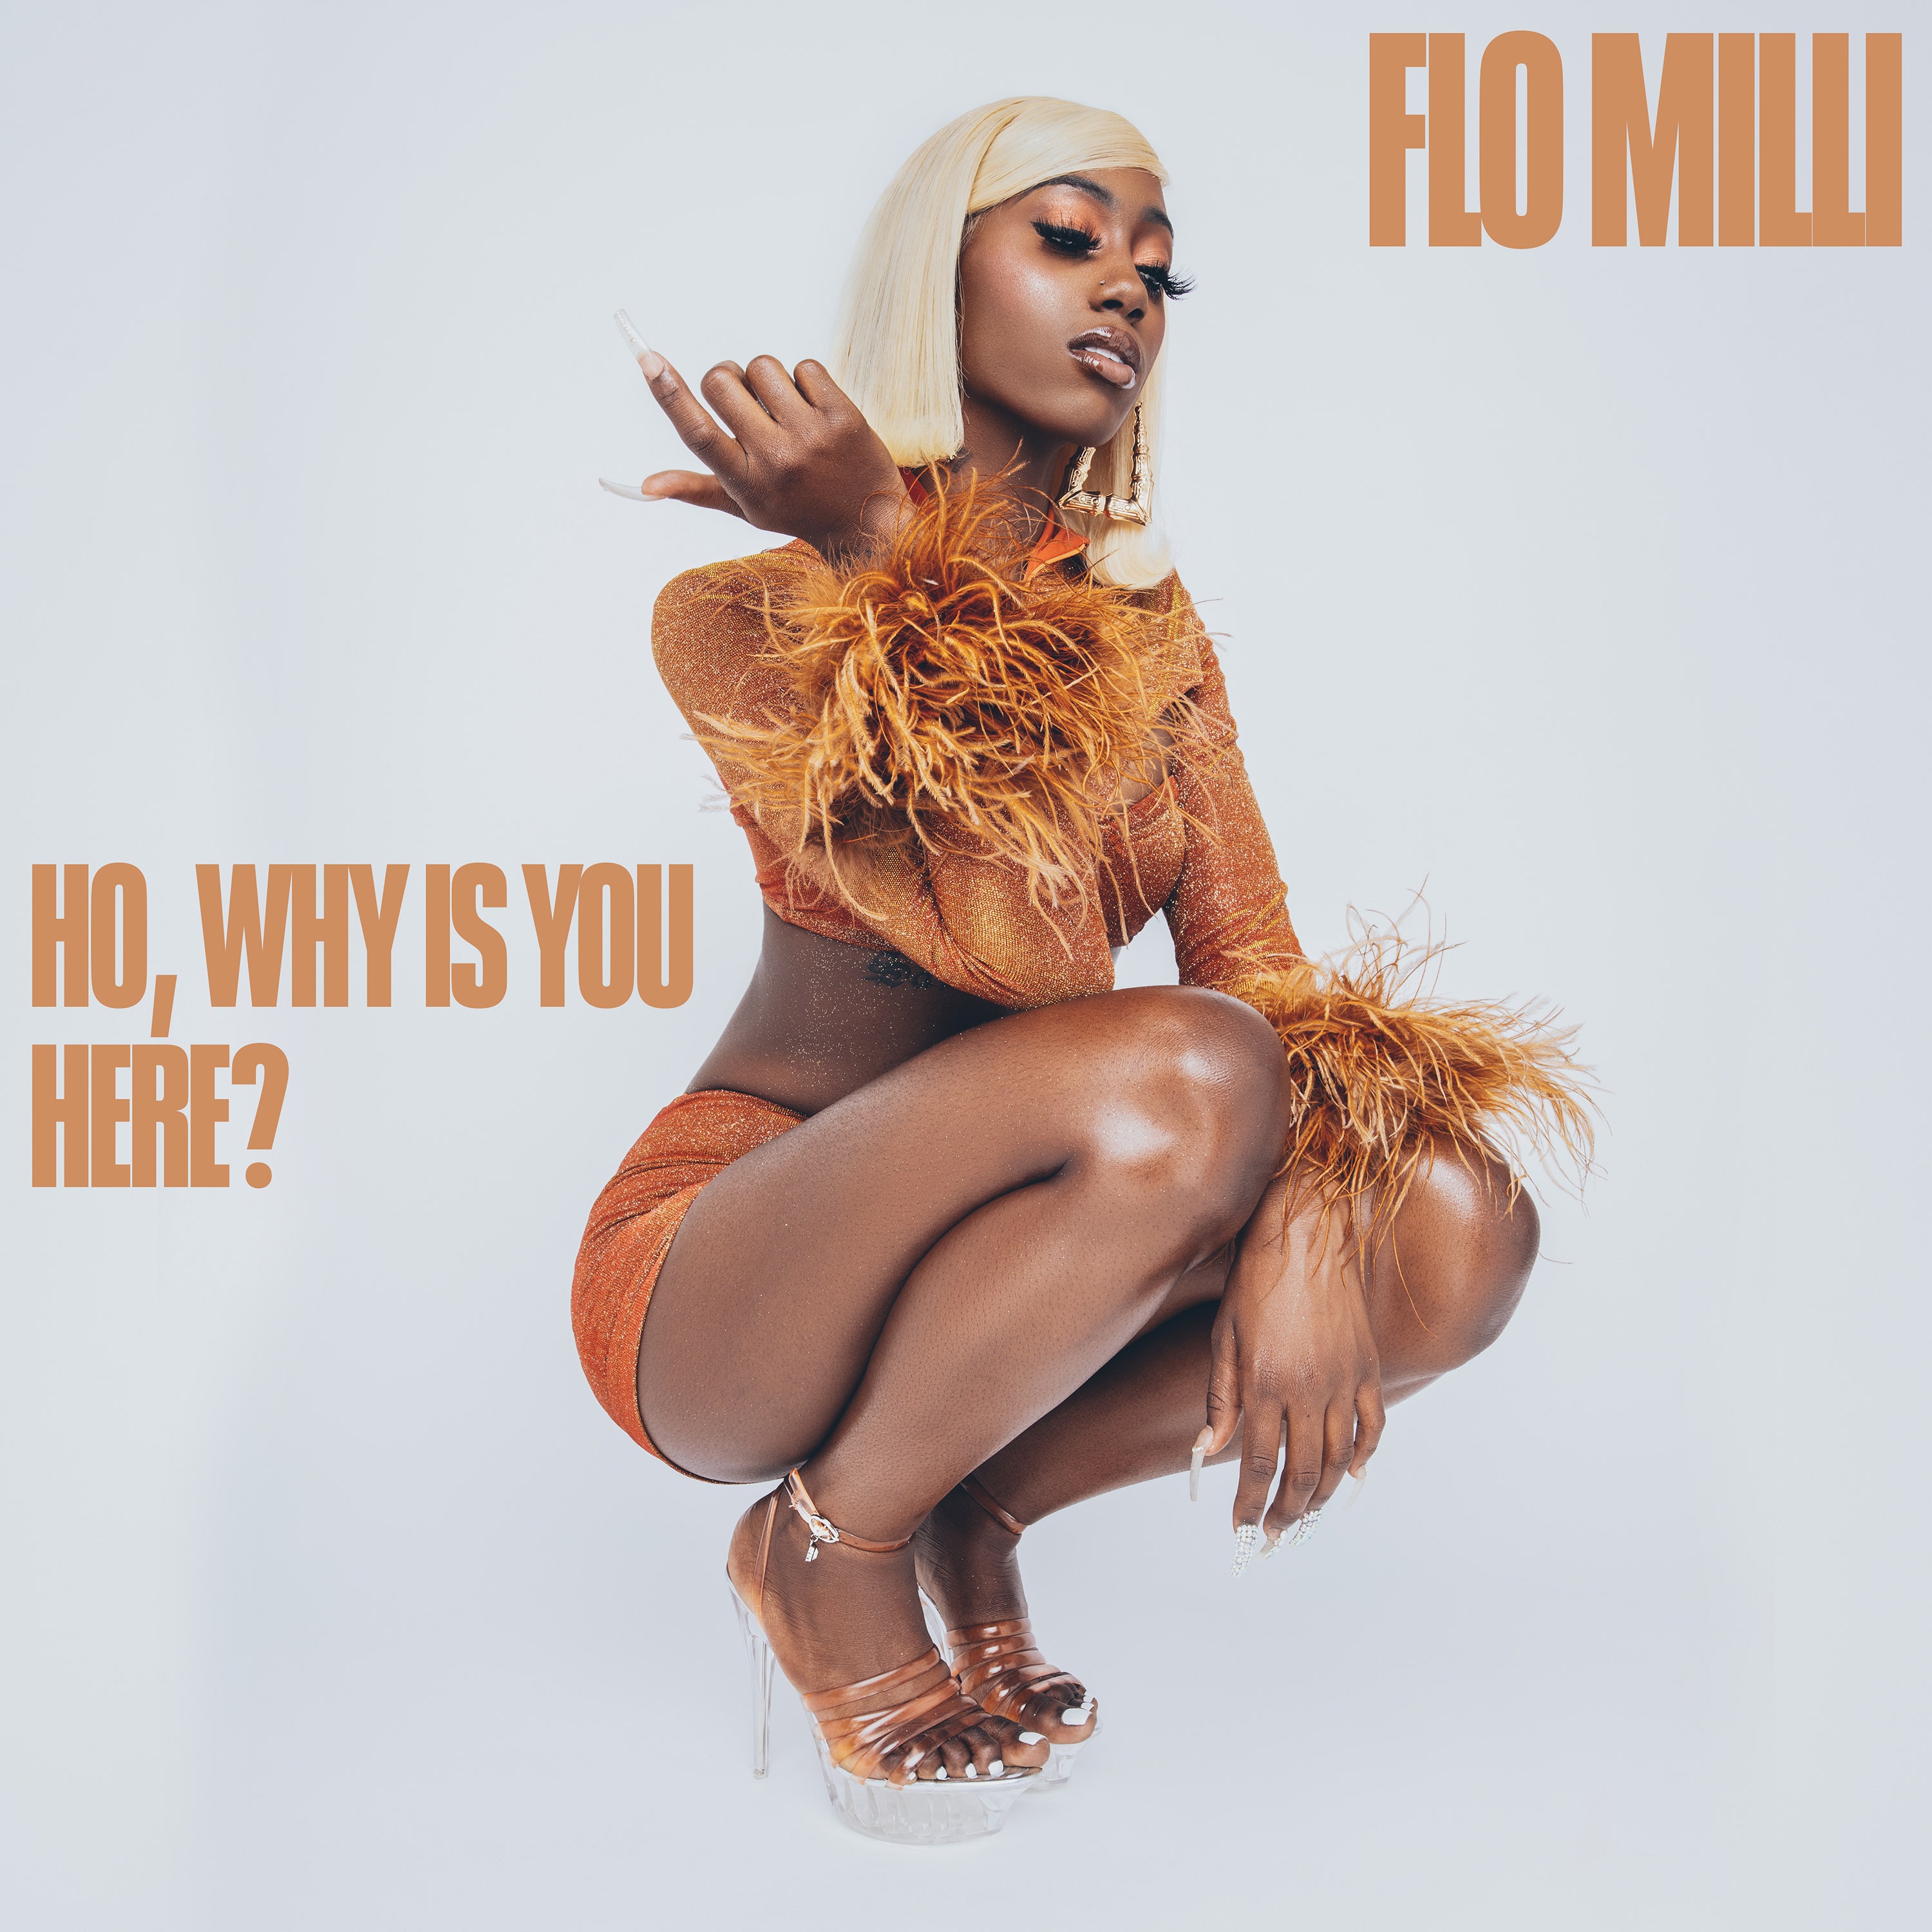 Flo Milli Ho Why Is You Here? cover artwork